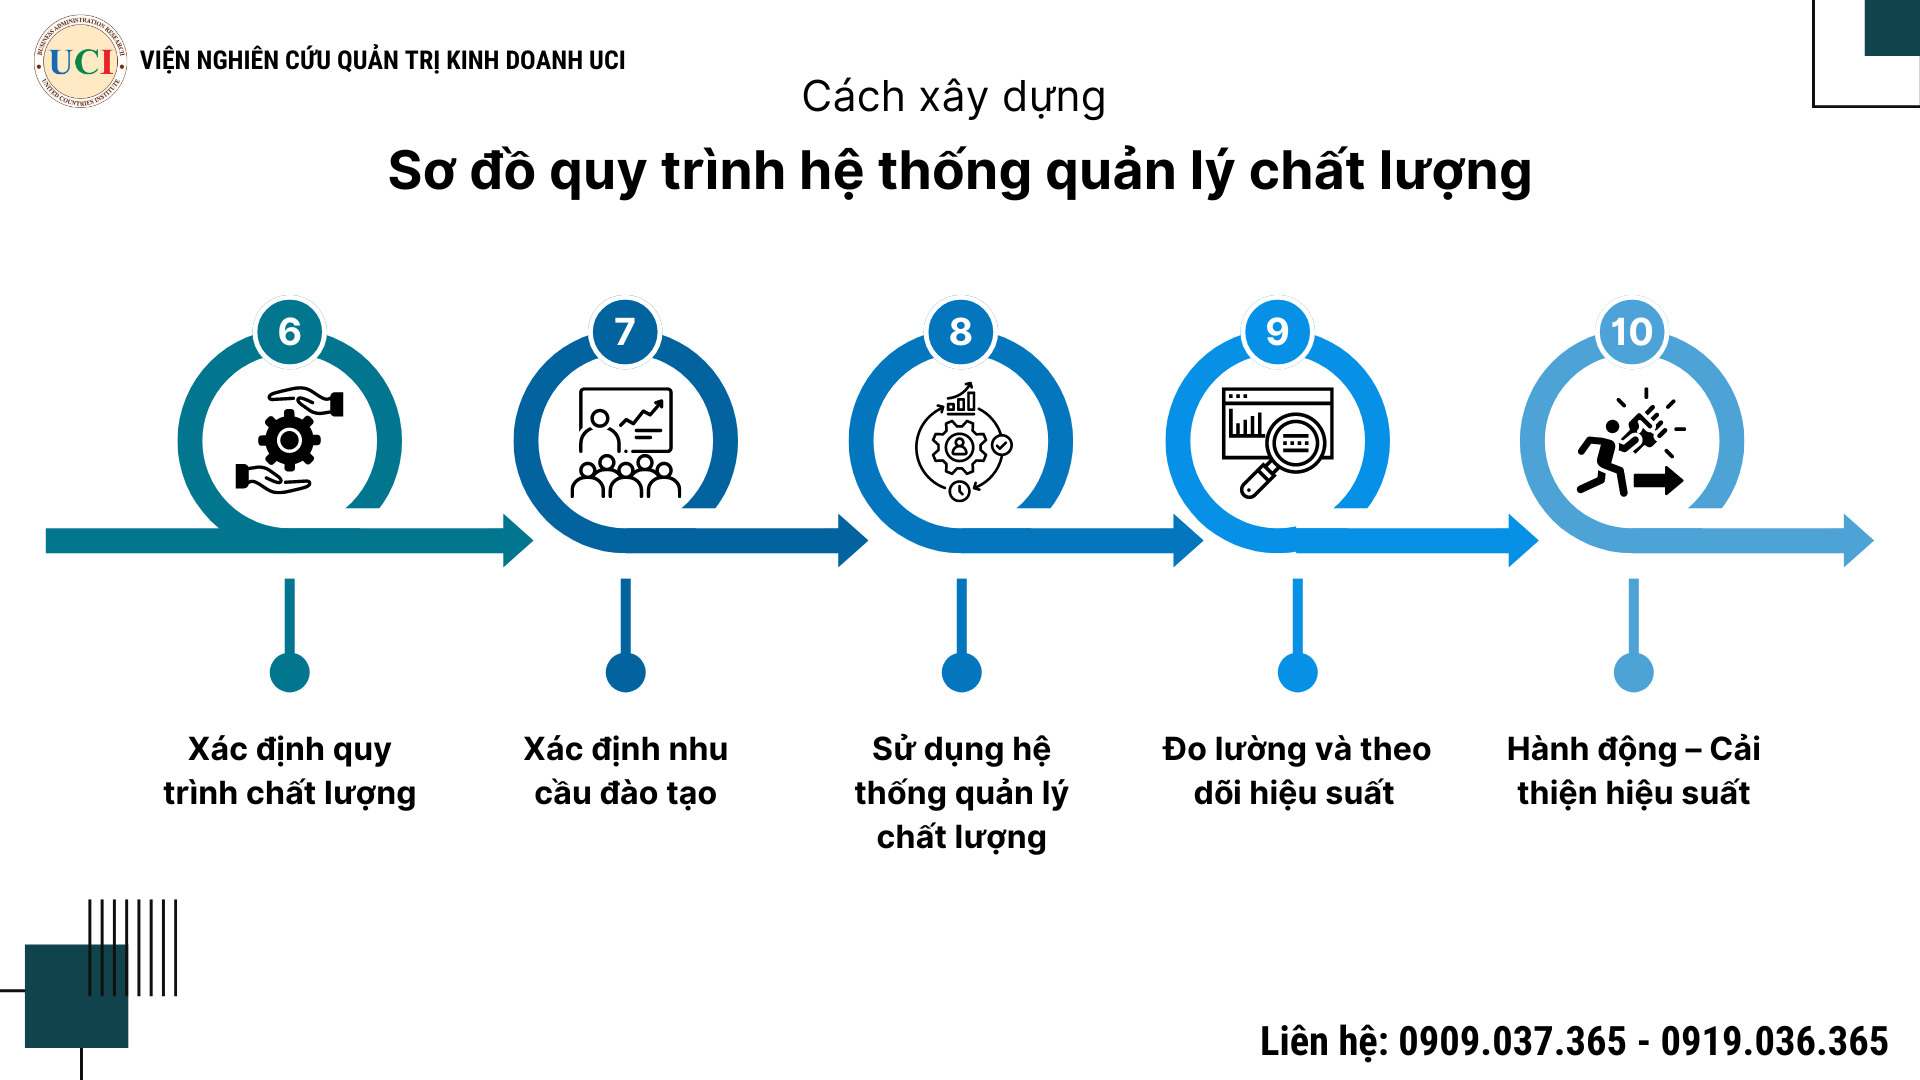 so-do-quy-trinh-he-thong-qlcl-2_2-png.54283